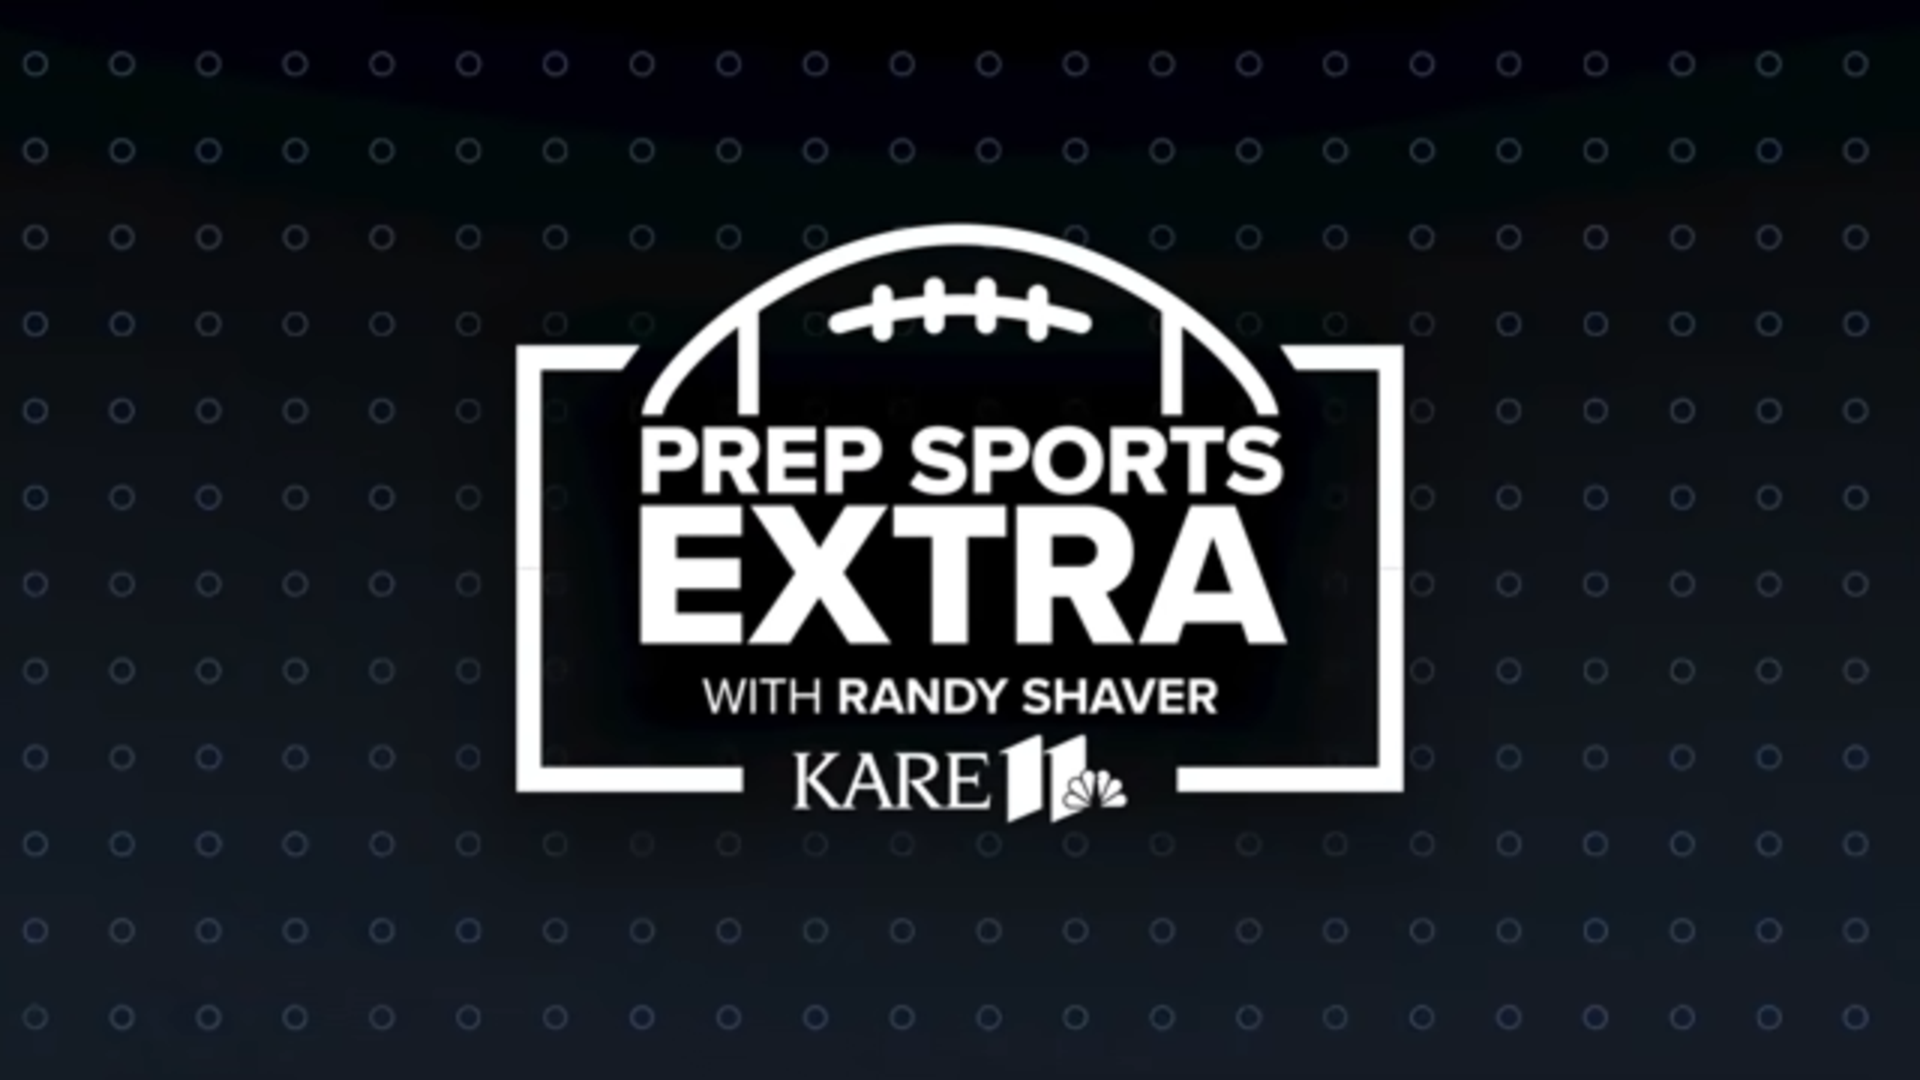 Randy Shaver is back for the 39th season of the KARE 11 Prep Sports Extra, where he'll feature high school football highlights from all over the state.